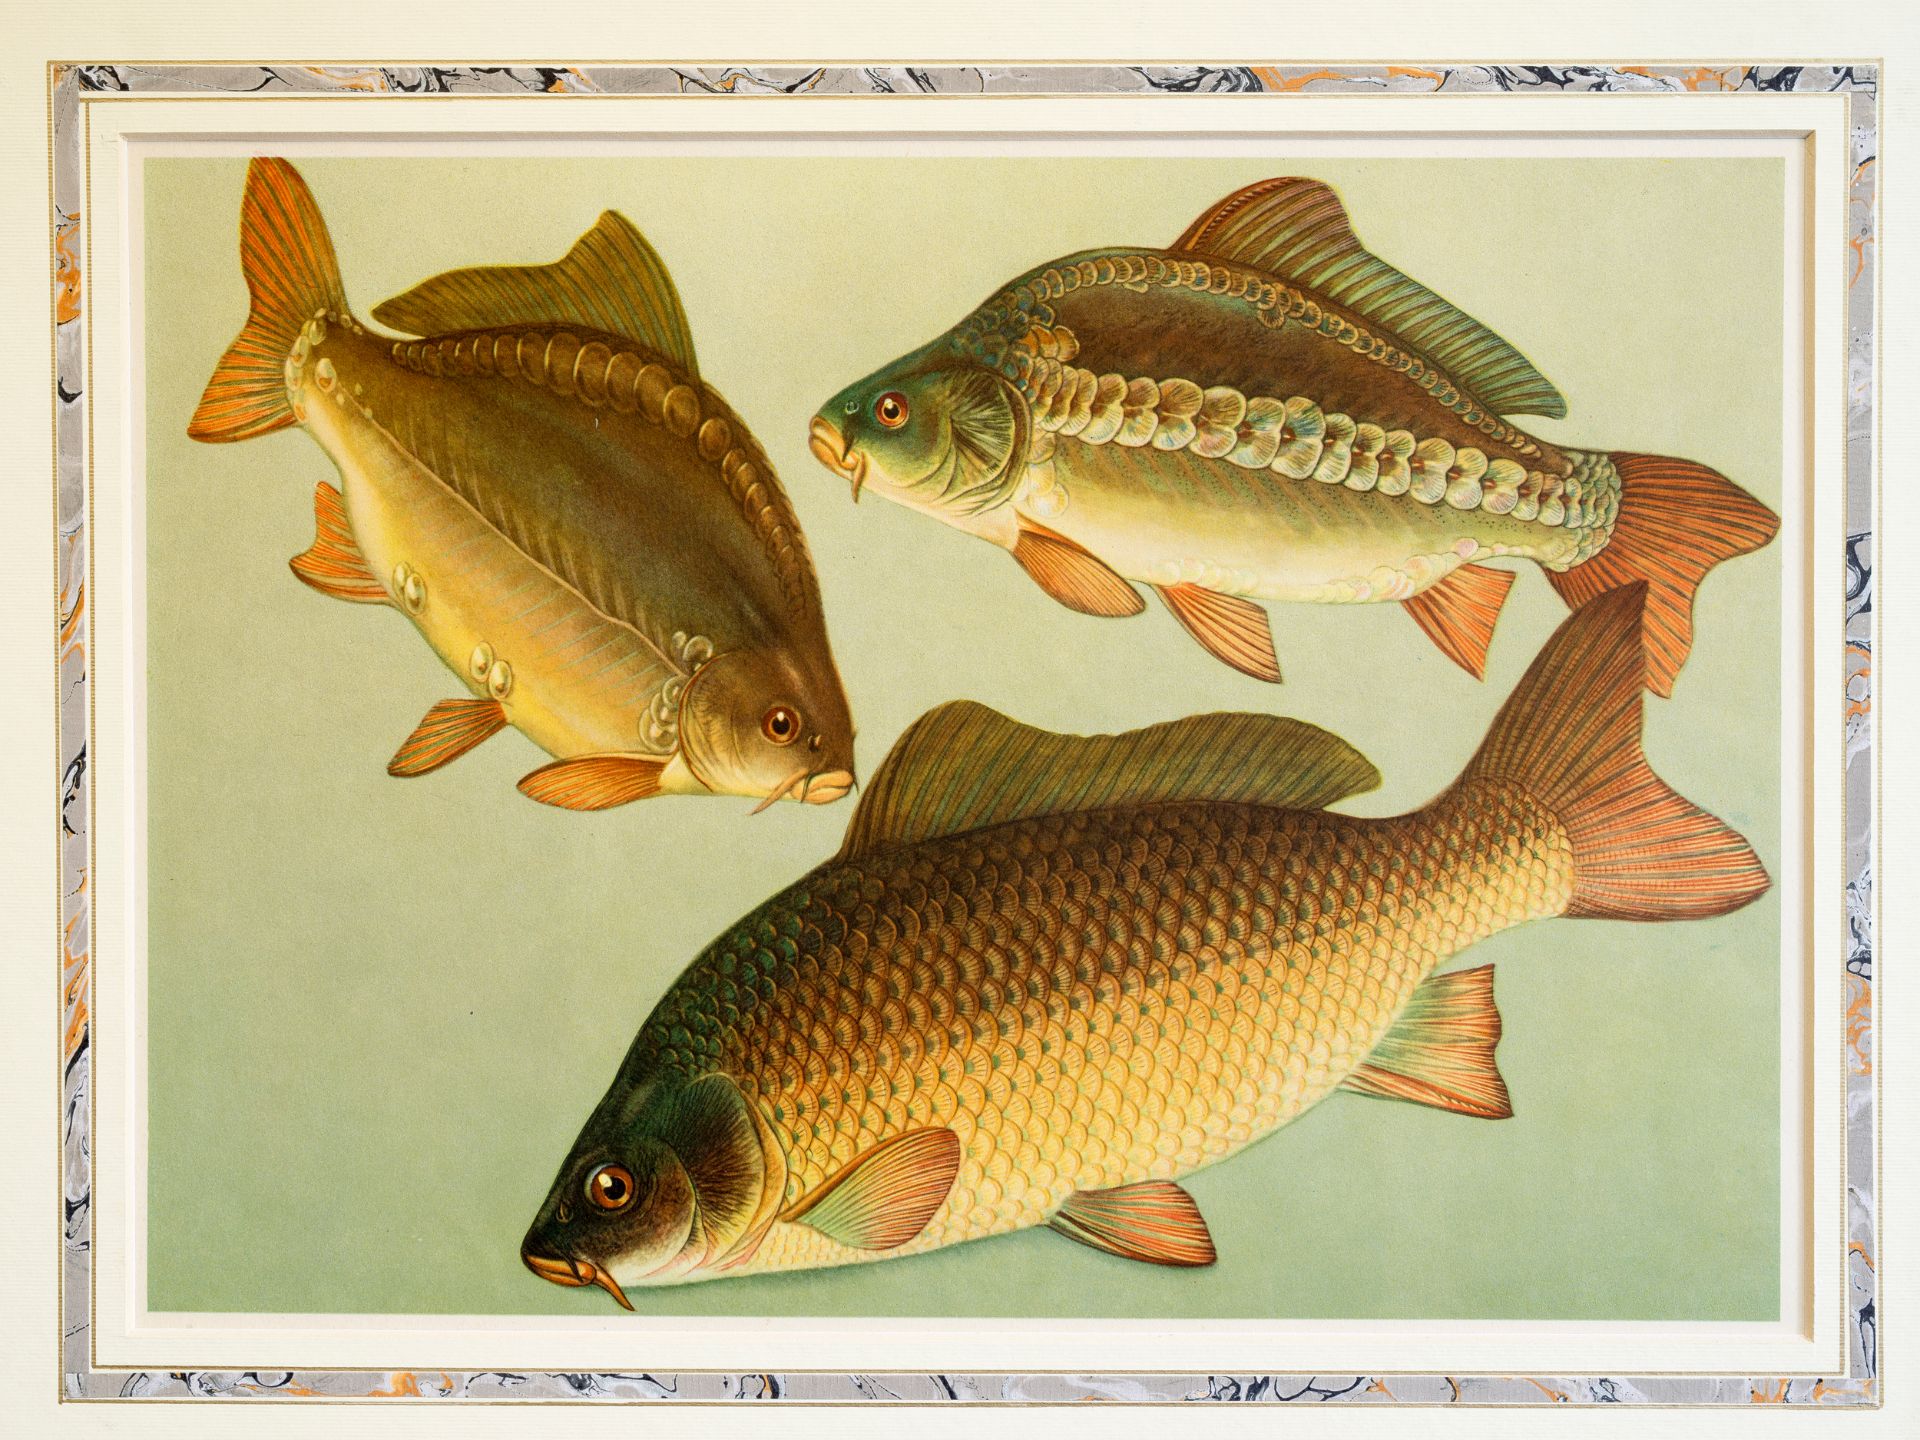 "Three carp", Probably from a treatise on fish species, Lithography